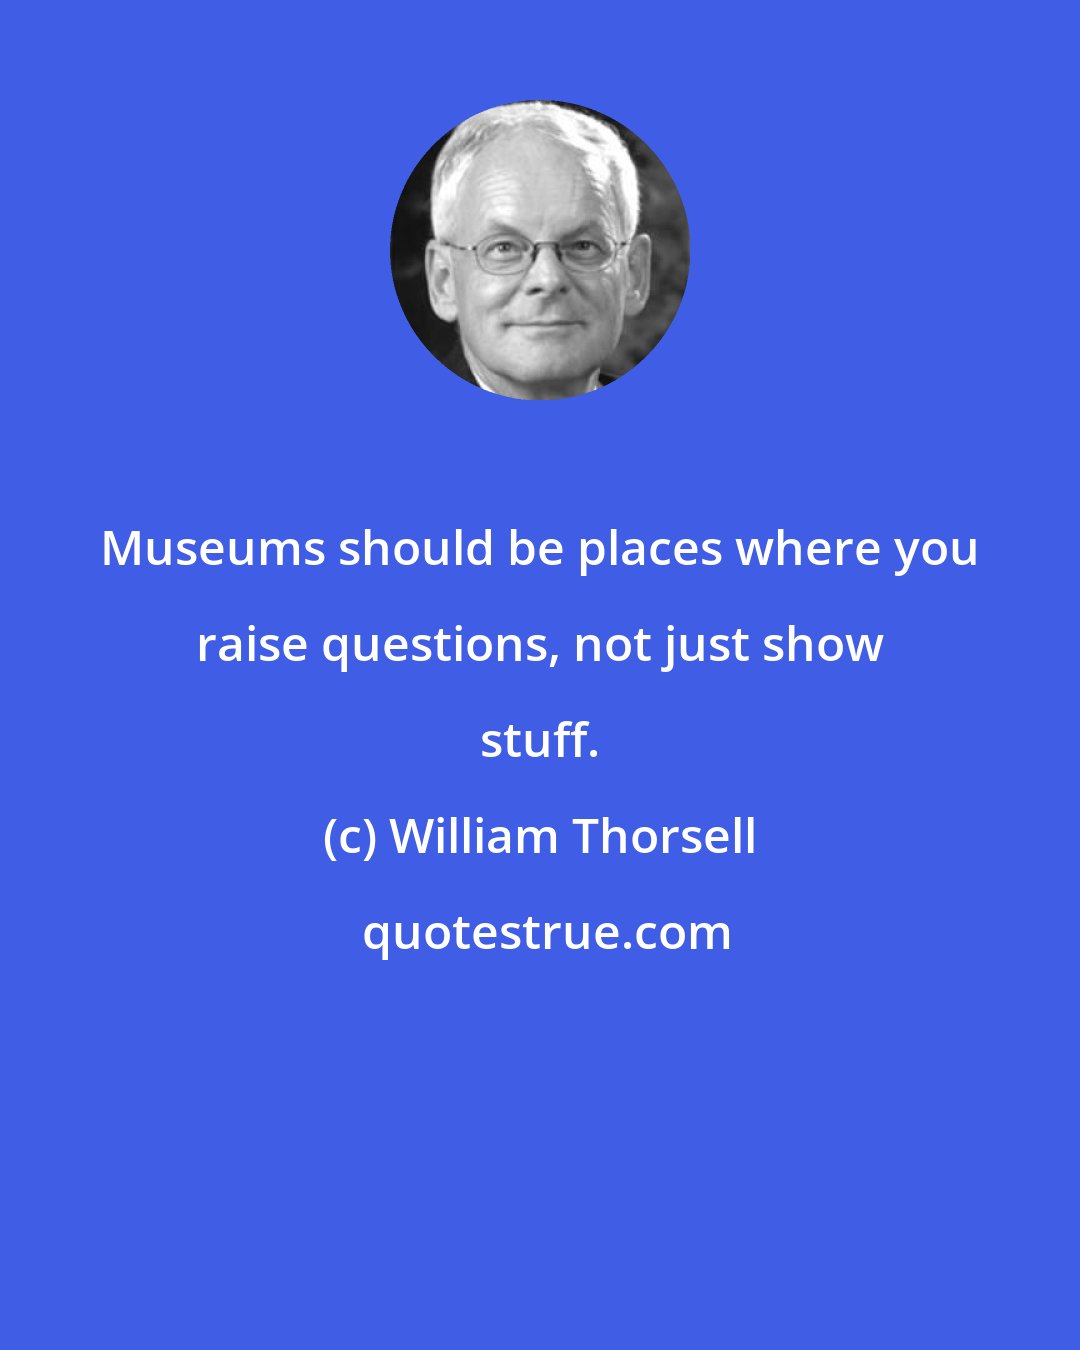 William Thorsell: Museums should be places where you raise questions, not just show stuff.